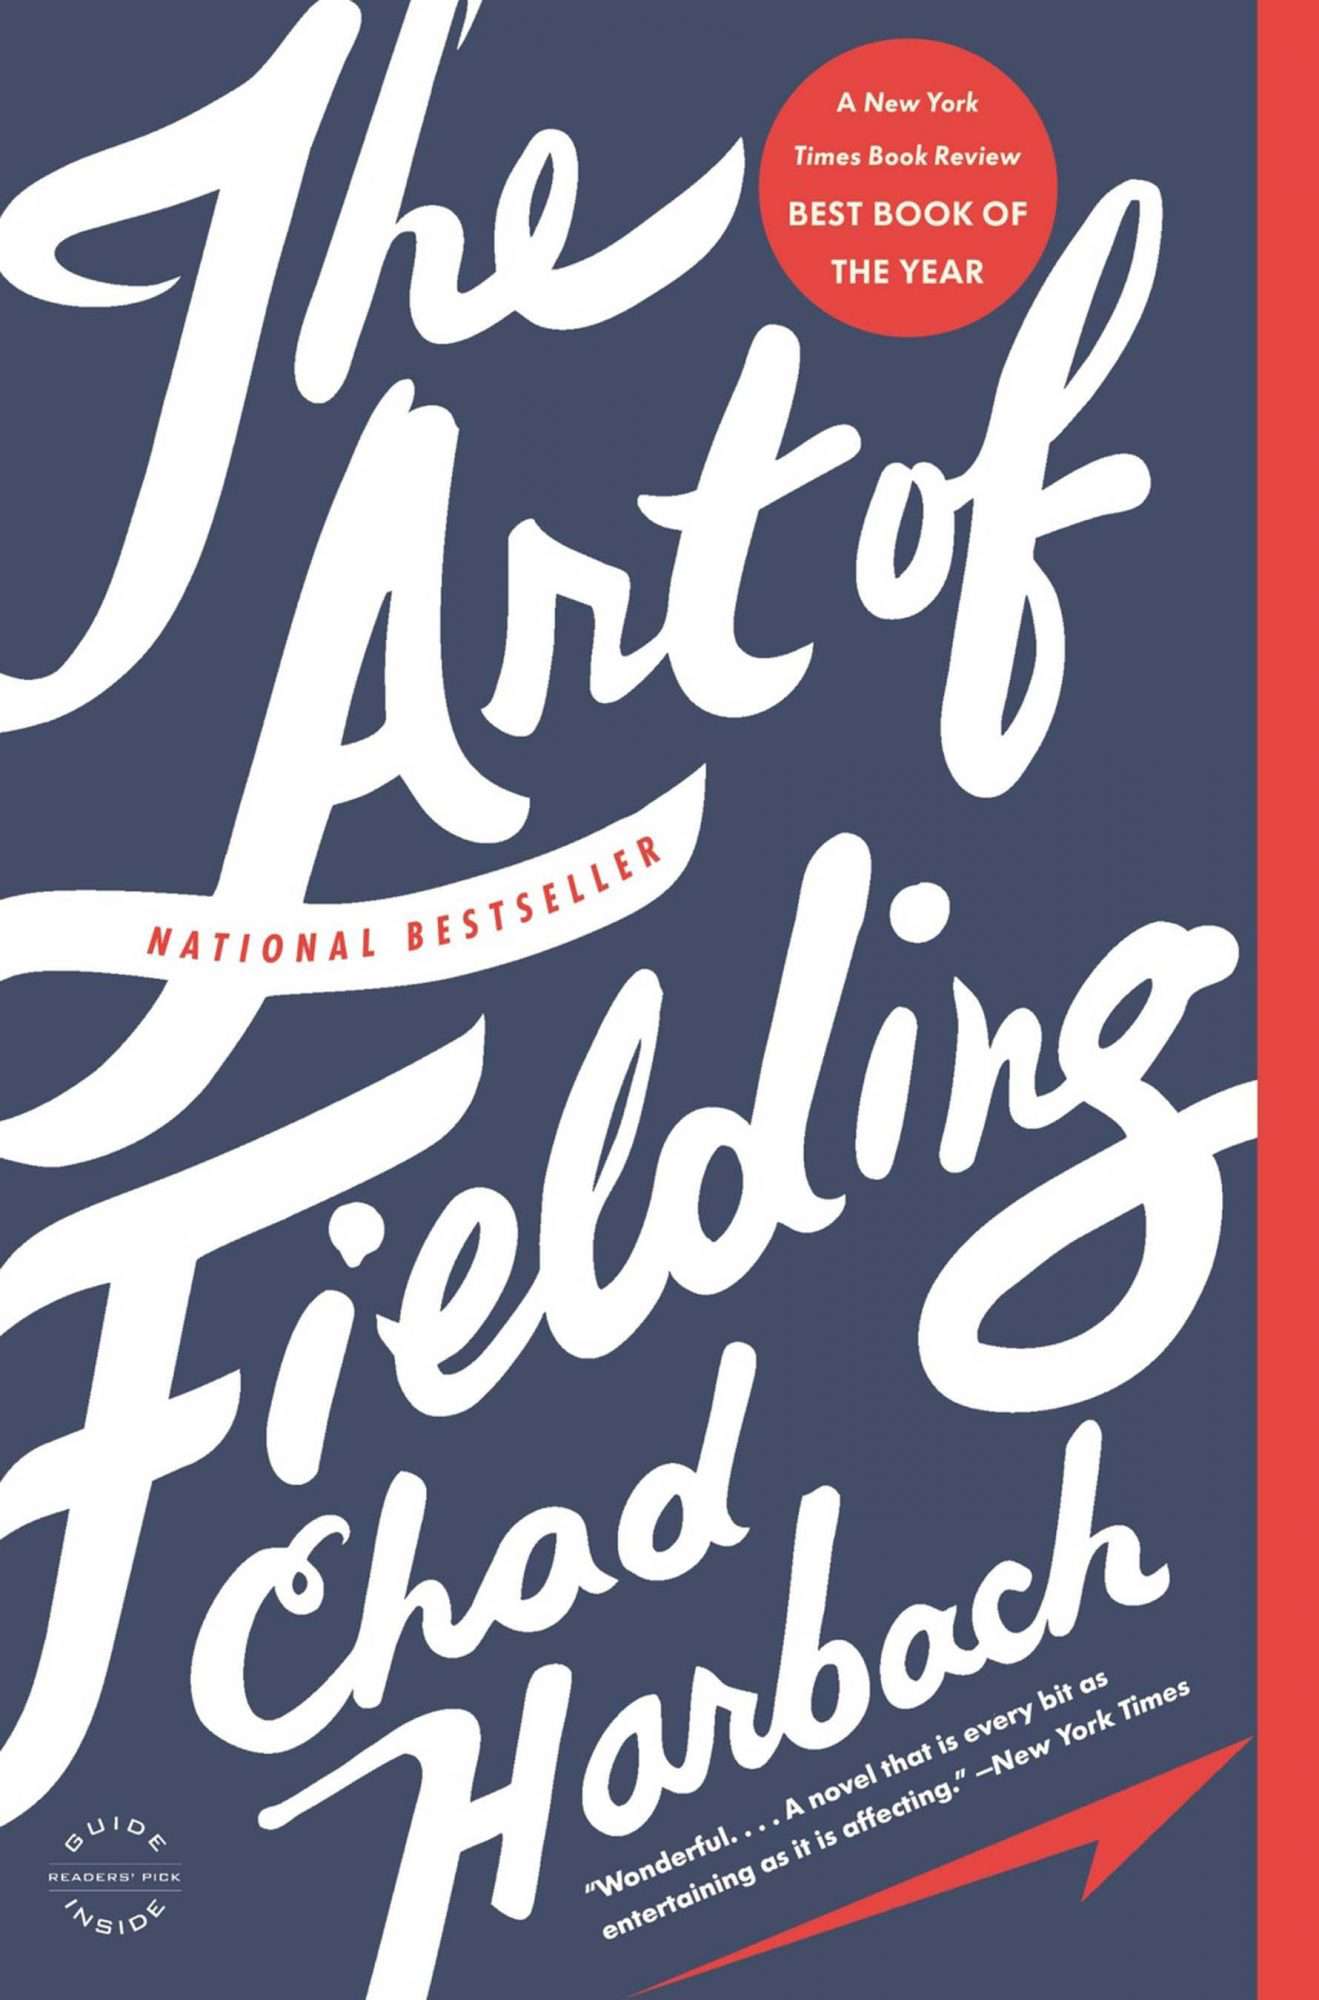 The Art of Fielding by Chad Harbach (2011)